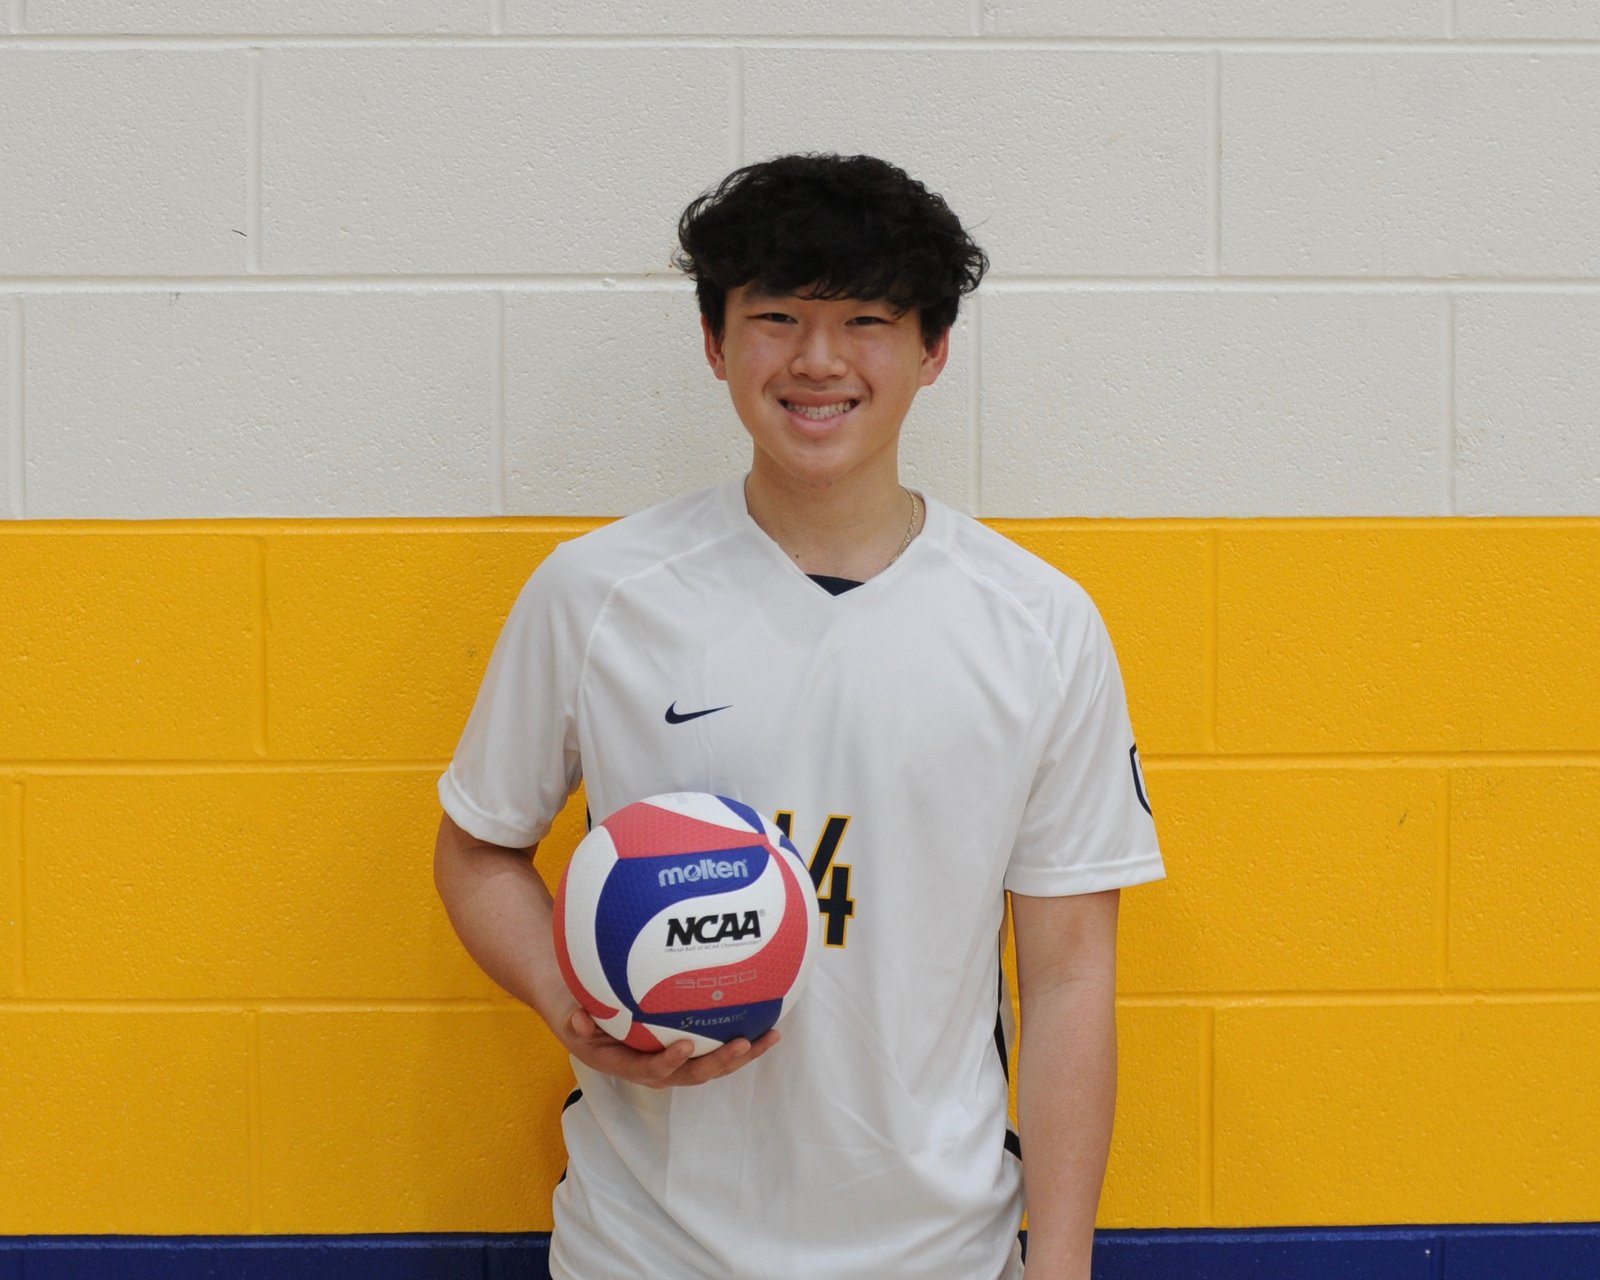 Moeller High School volleyball program requests petitions to help senior Brandon Wong